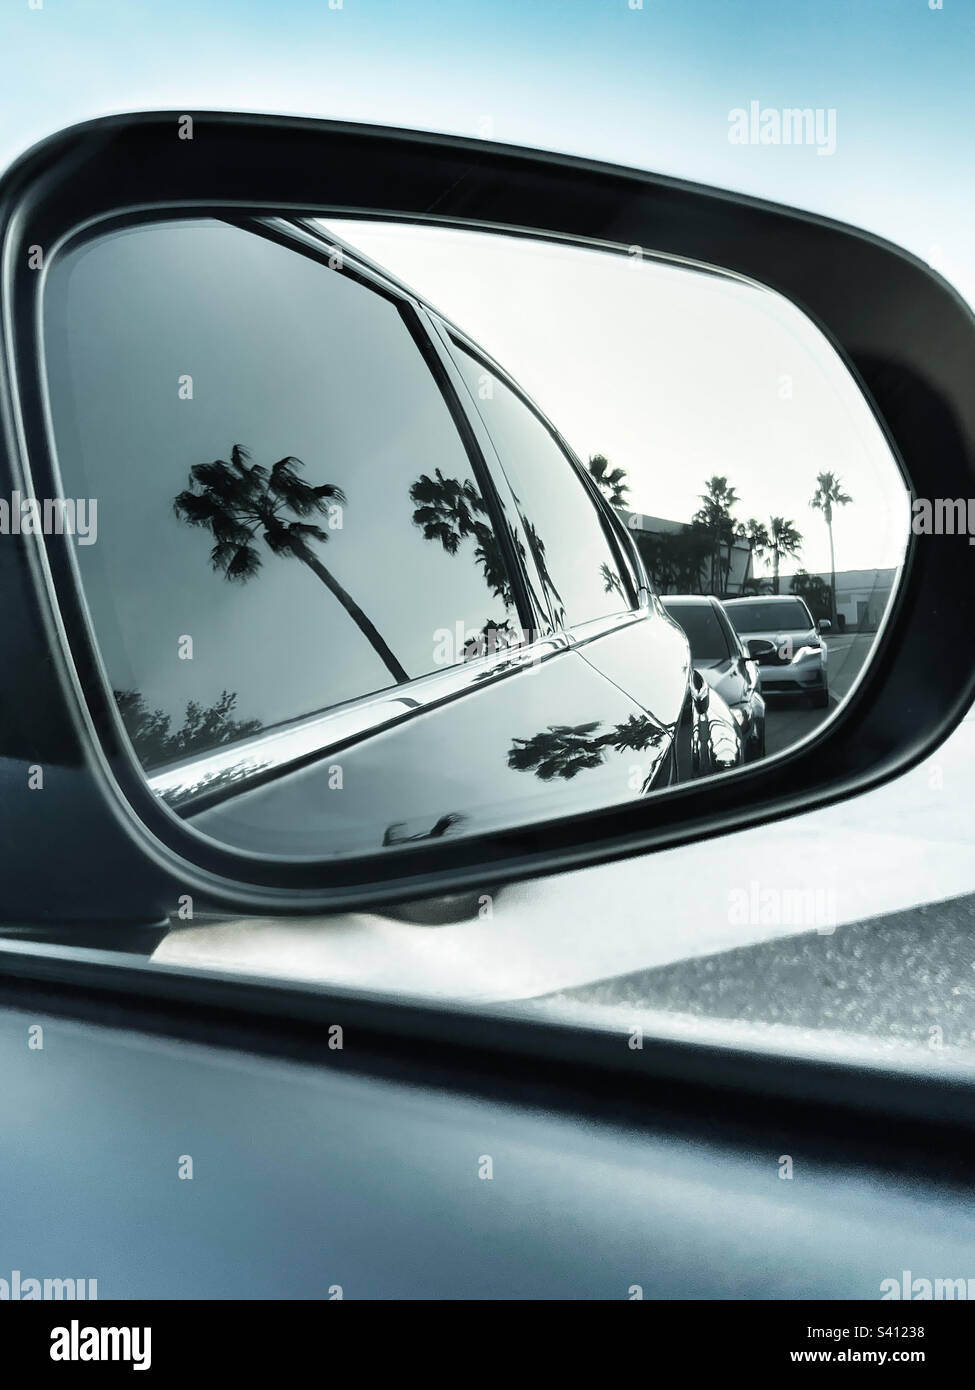 73,799 Window Reflection Car Images, Stock Photos, 3D objects, & Vectors